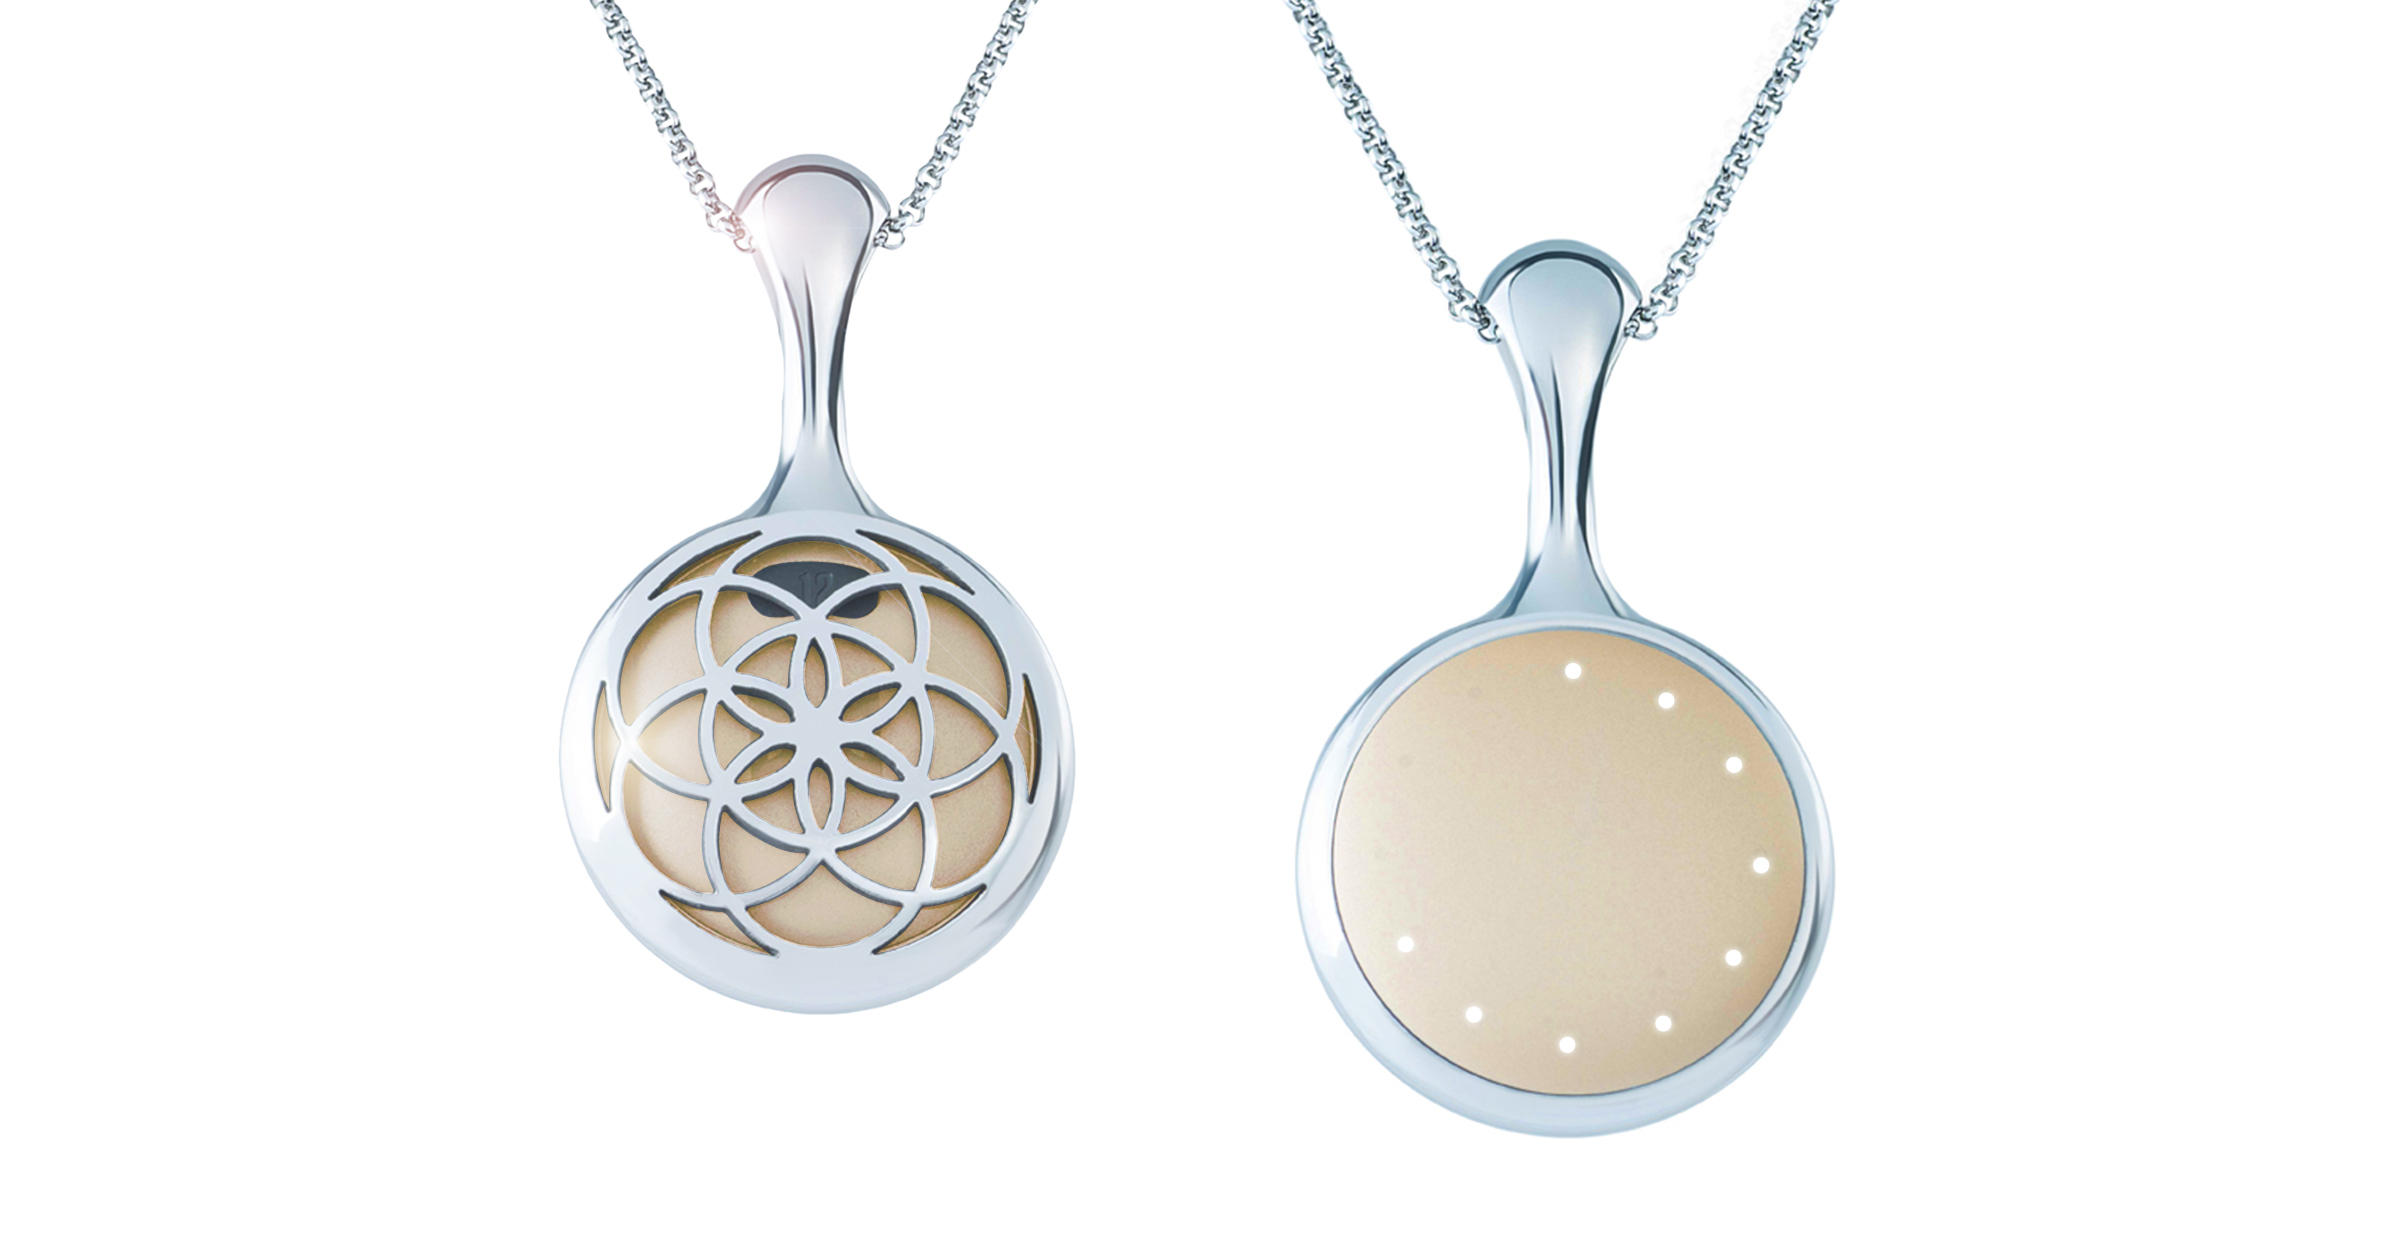 Wearables become beautiful (just in time for Mother’s Day)